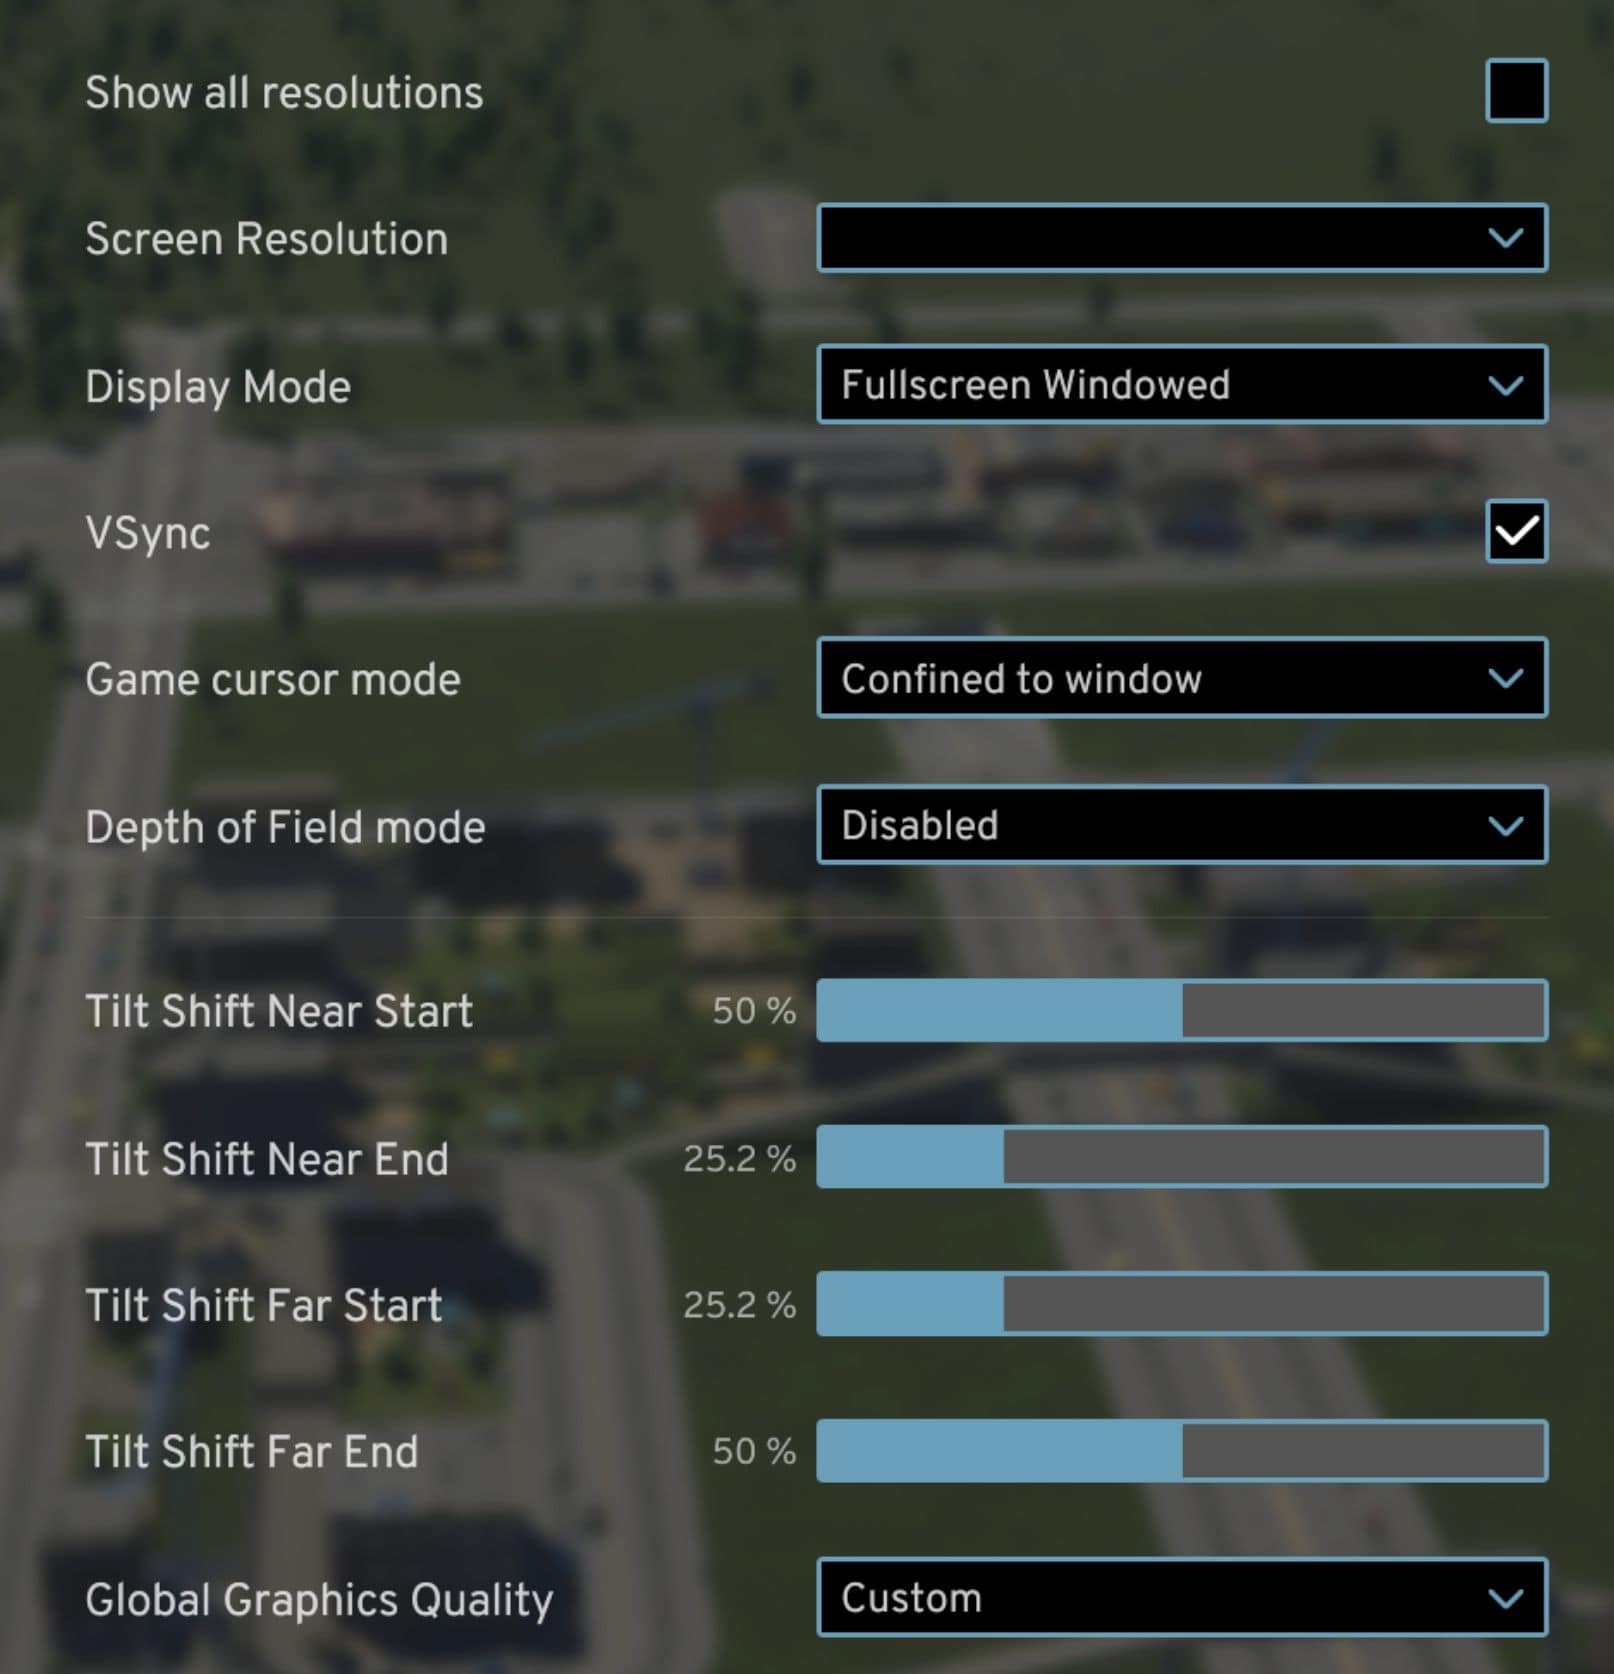 Cities: Skylines 2 System Requirements - PC Specs